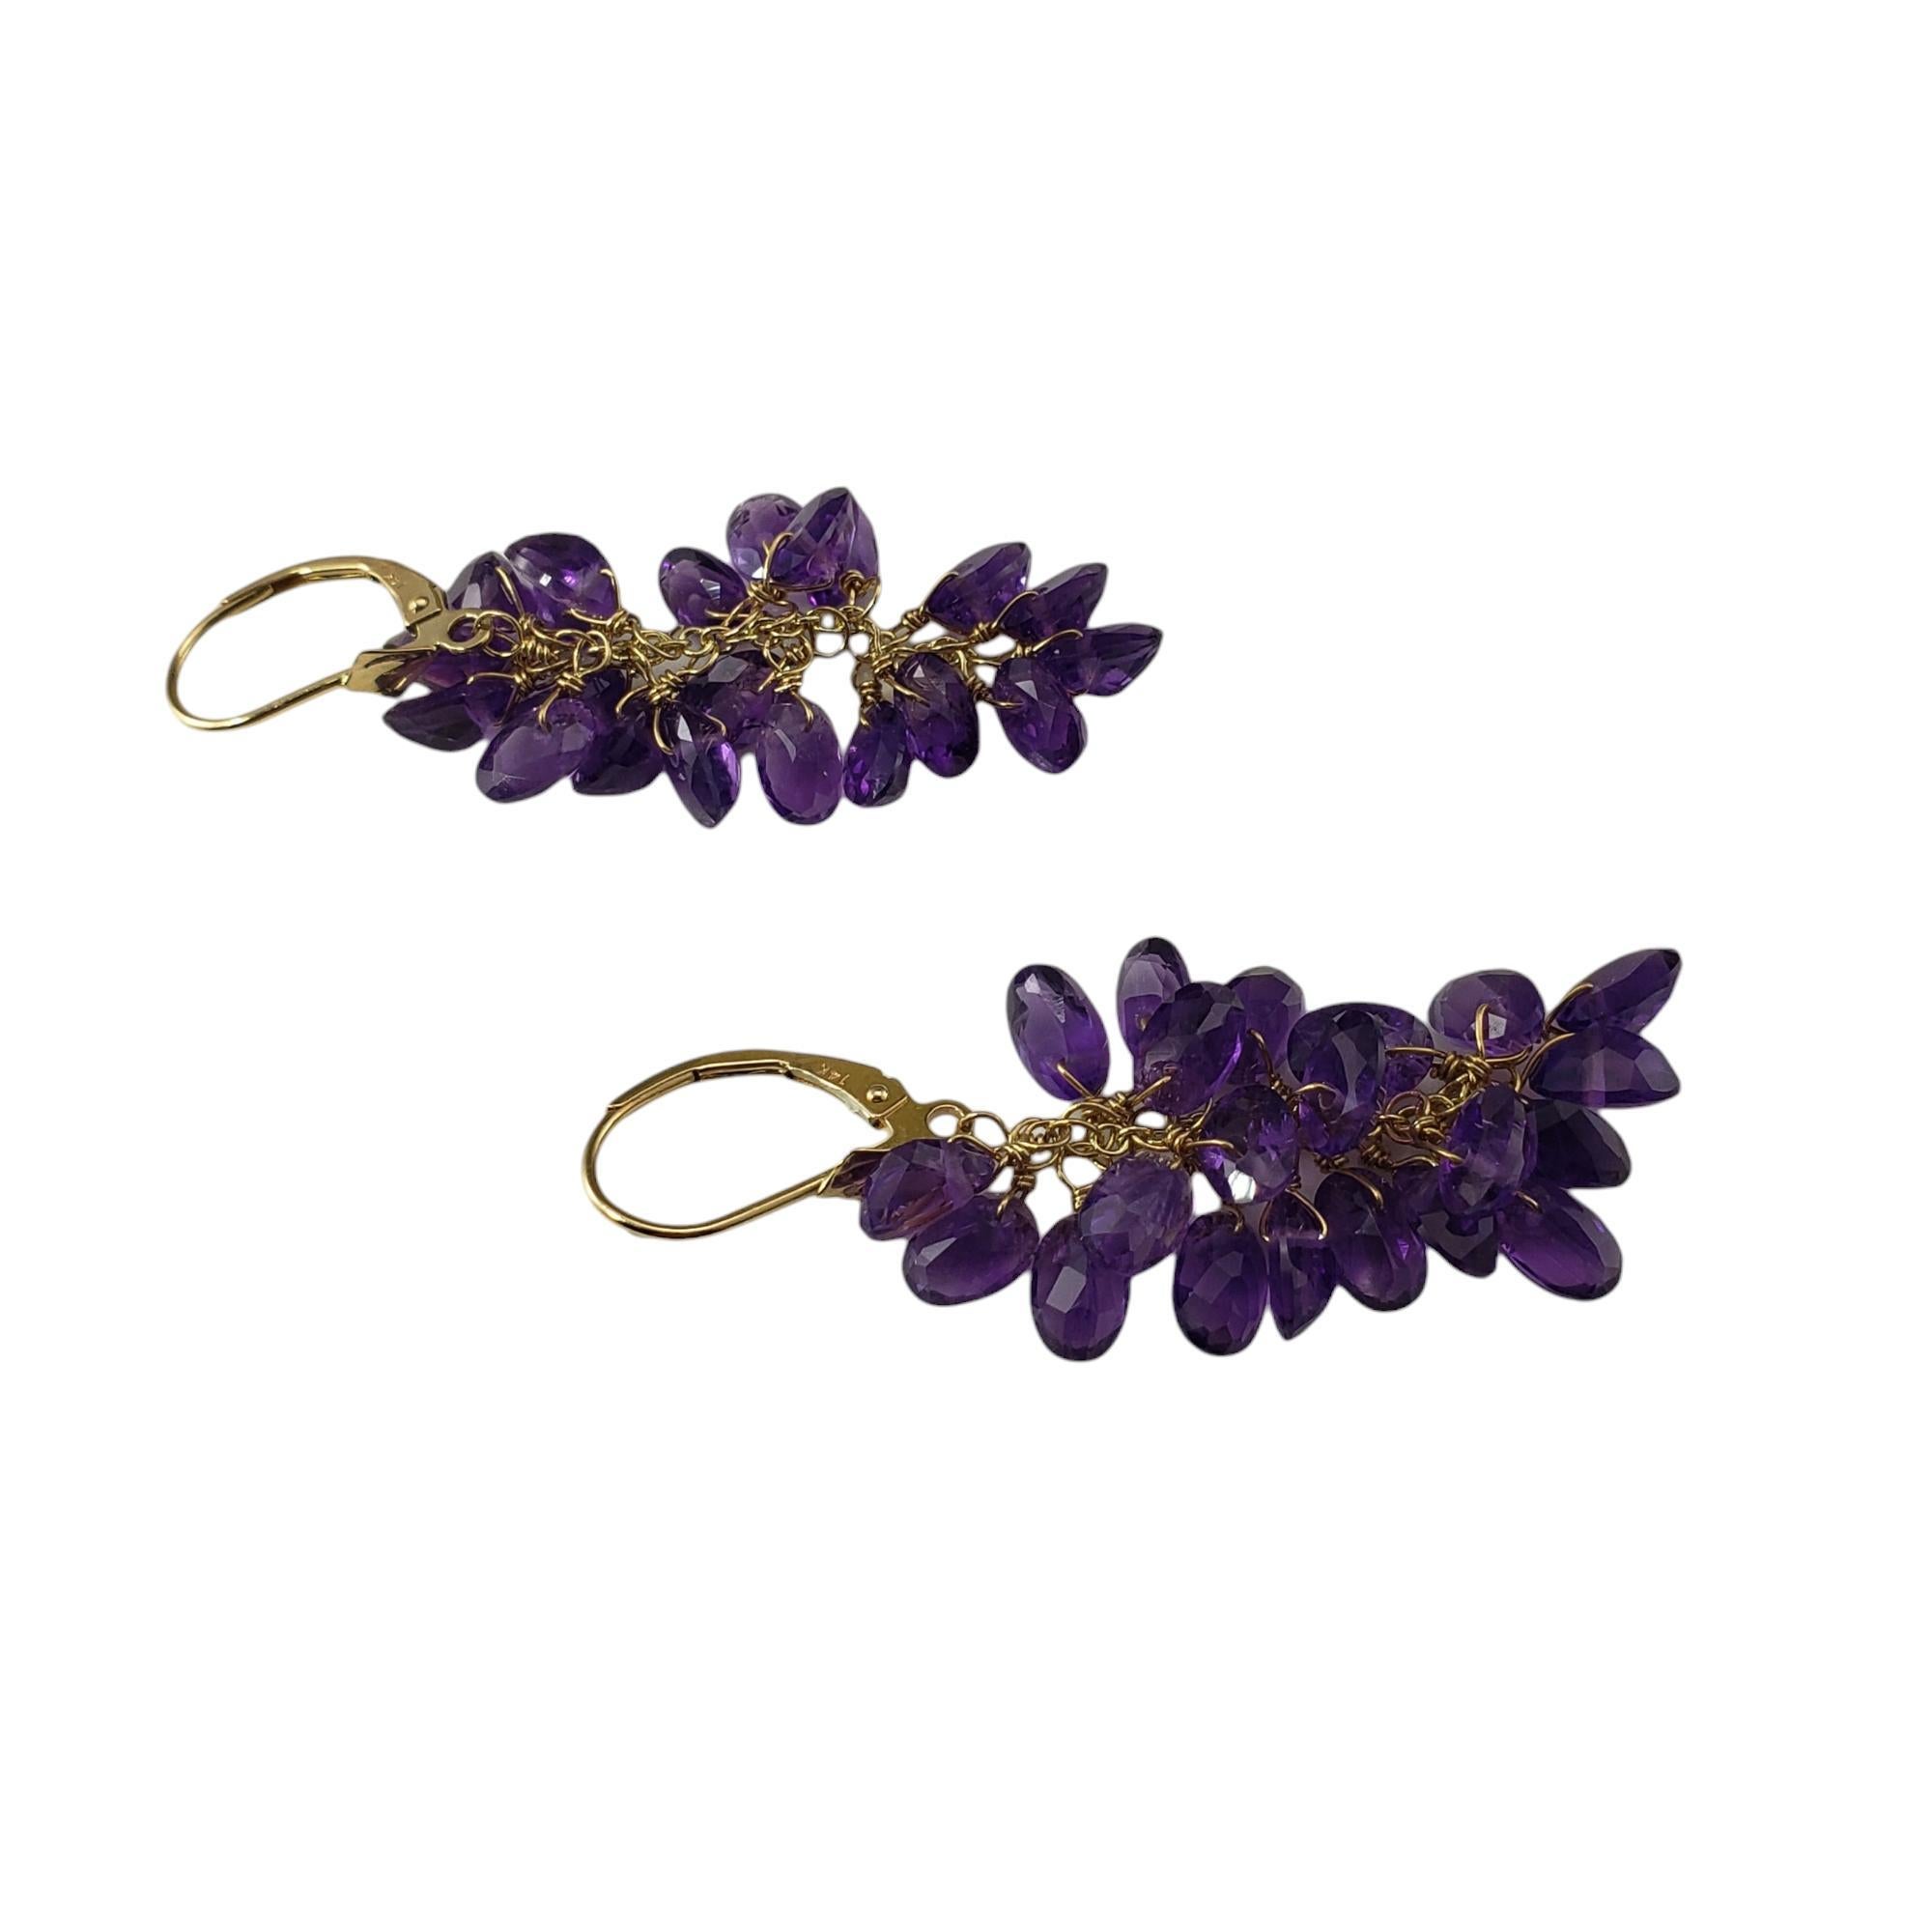 Bead 14 Karat Yellow Gold and Amethyst Dangle Earrings #17159 For Sale